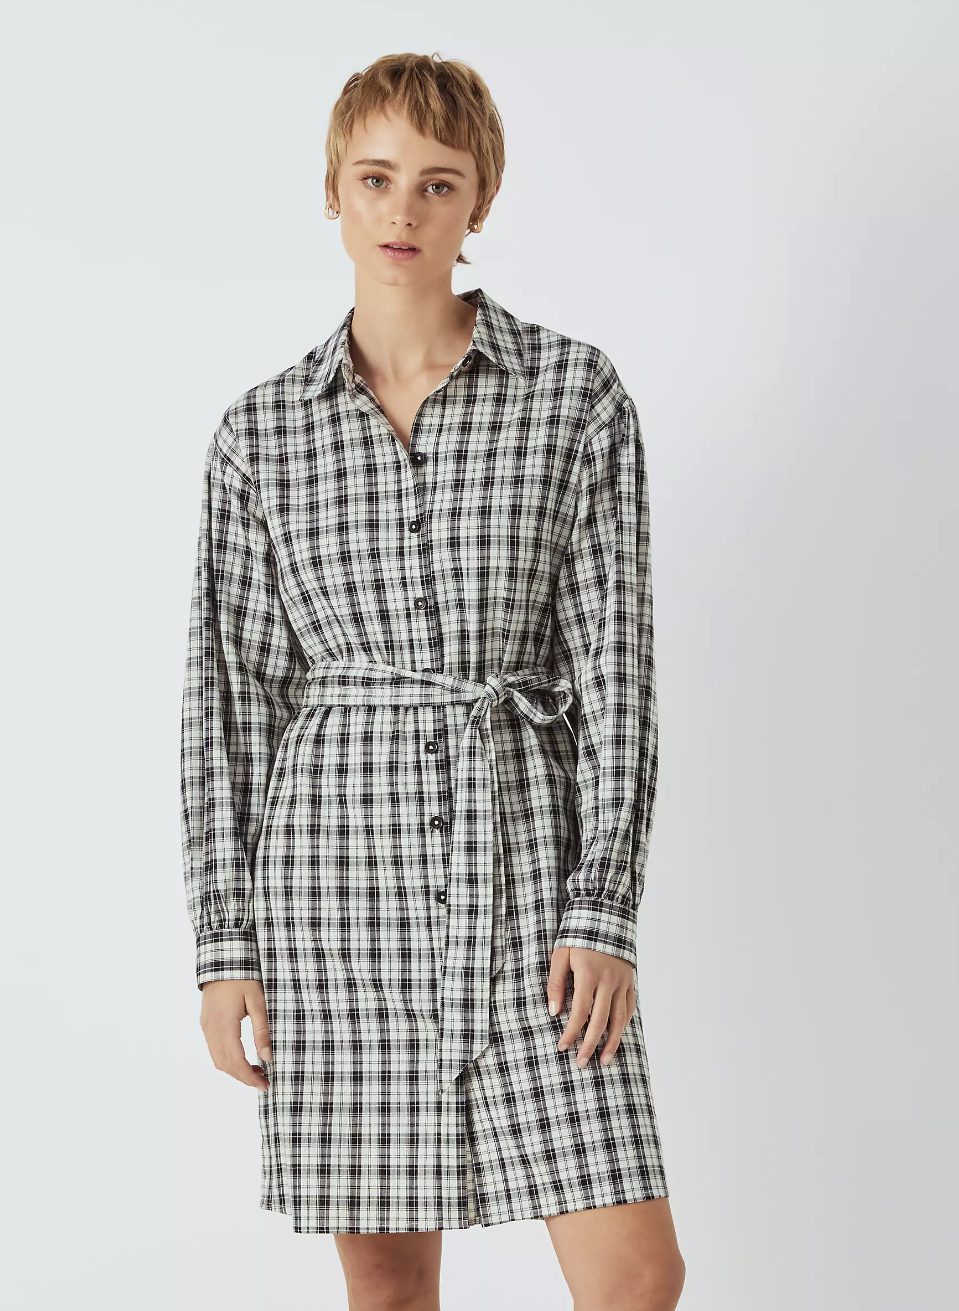 Best shirt dress 2023: 8 shirt dresses to wear to work and beyond